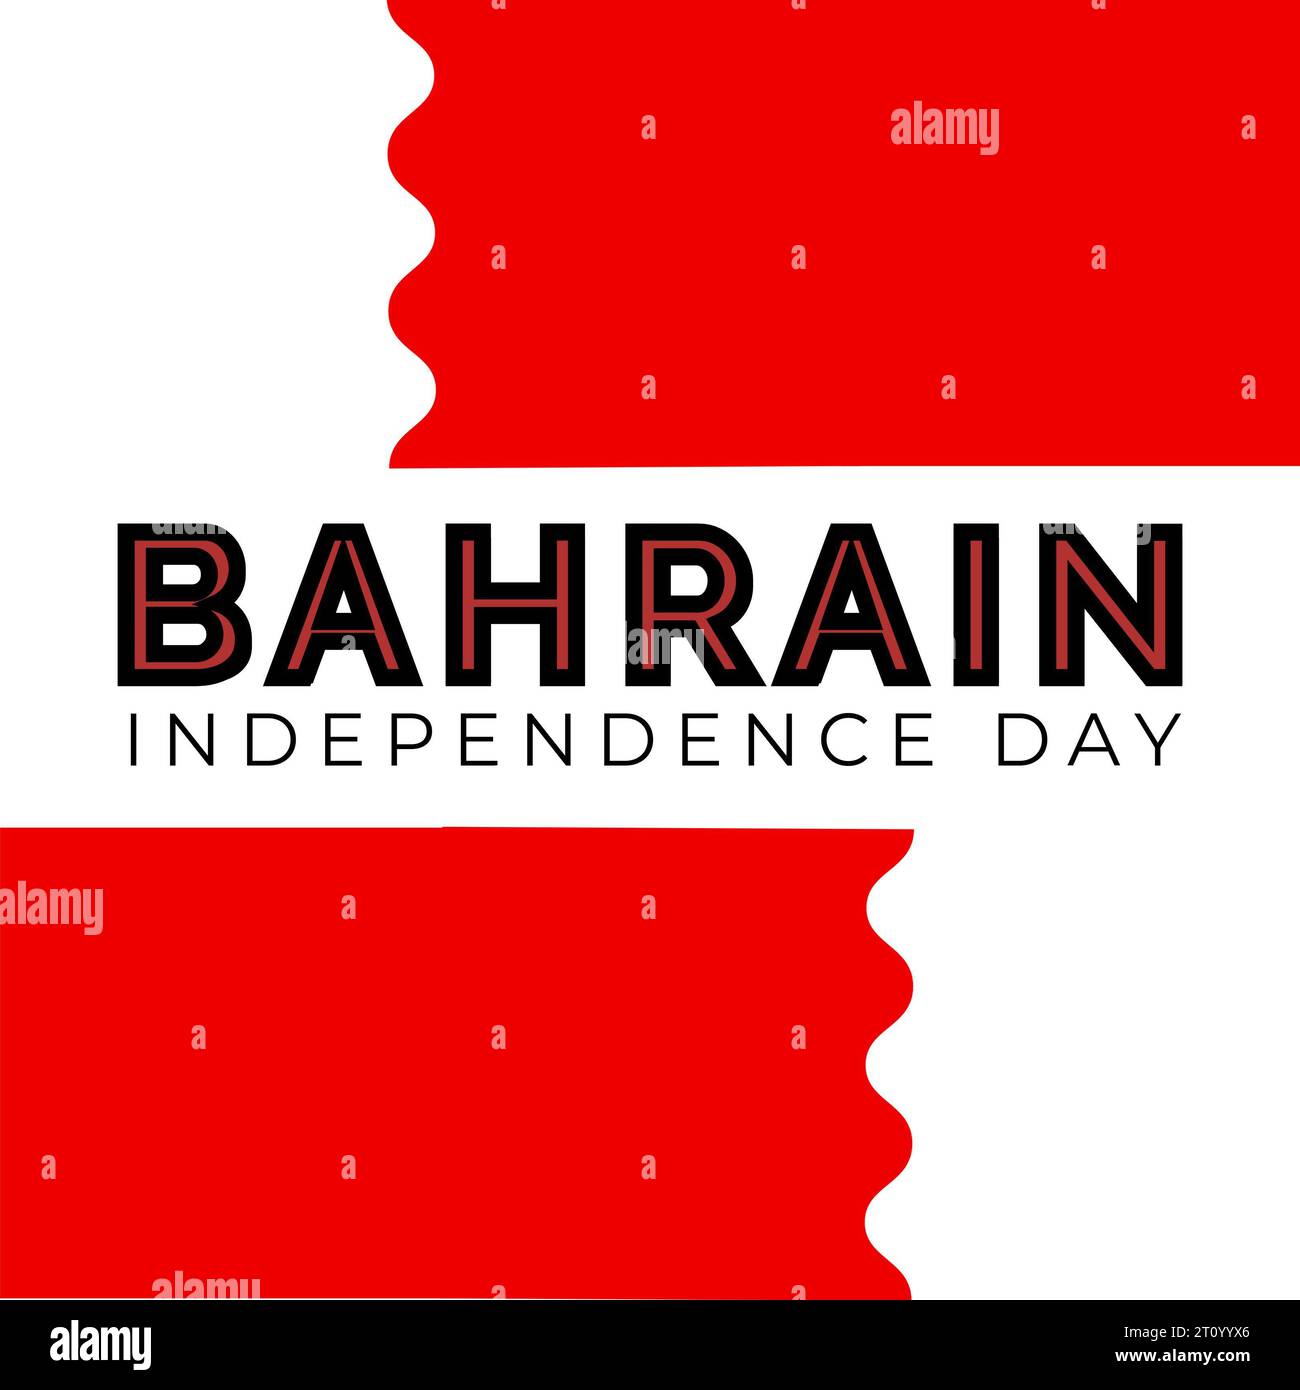 Illustration of bahrain independence day text over red and white background, copy space Stock Photo